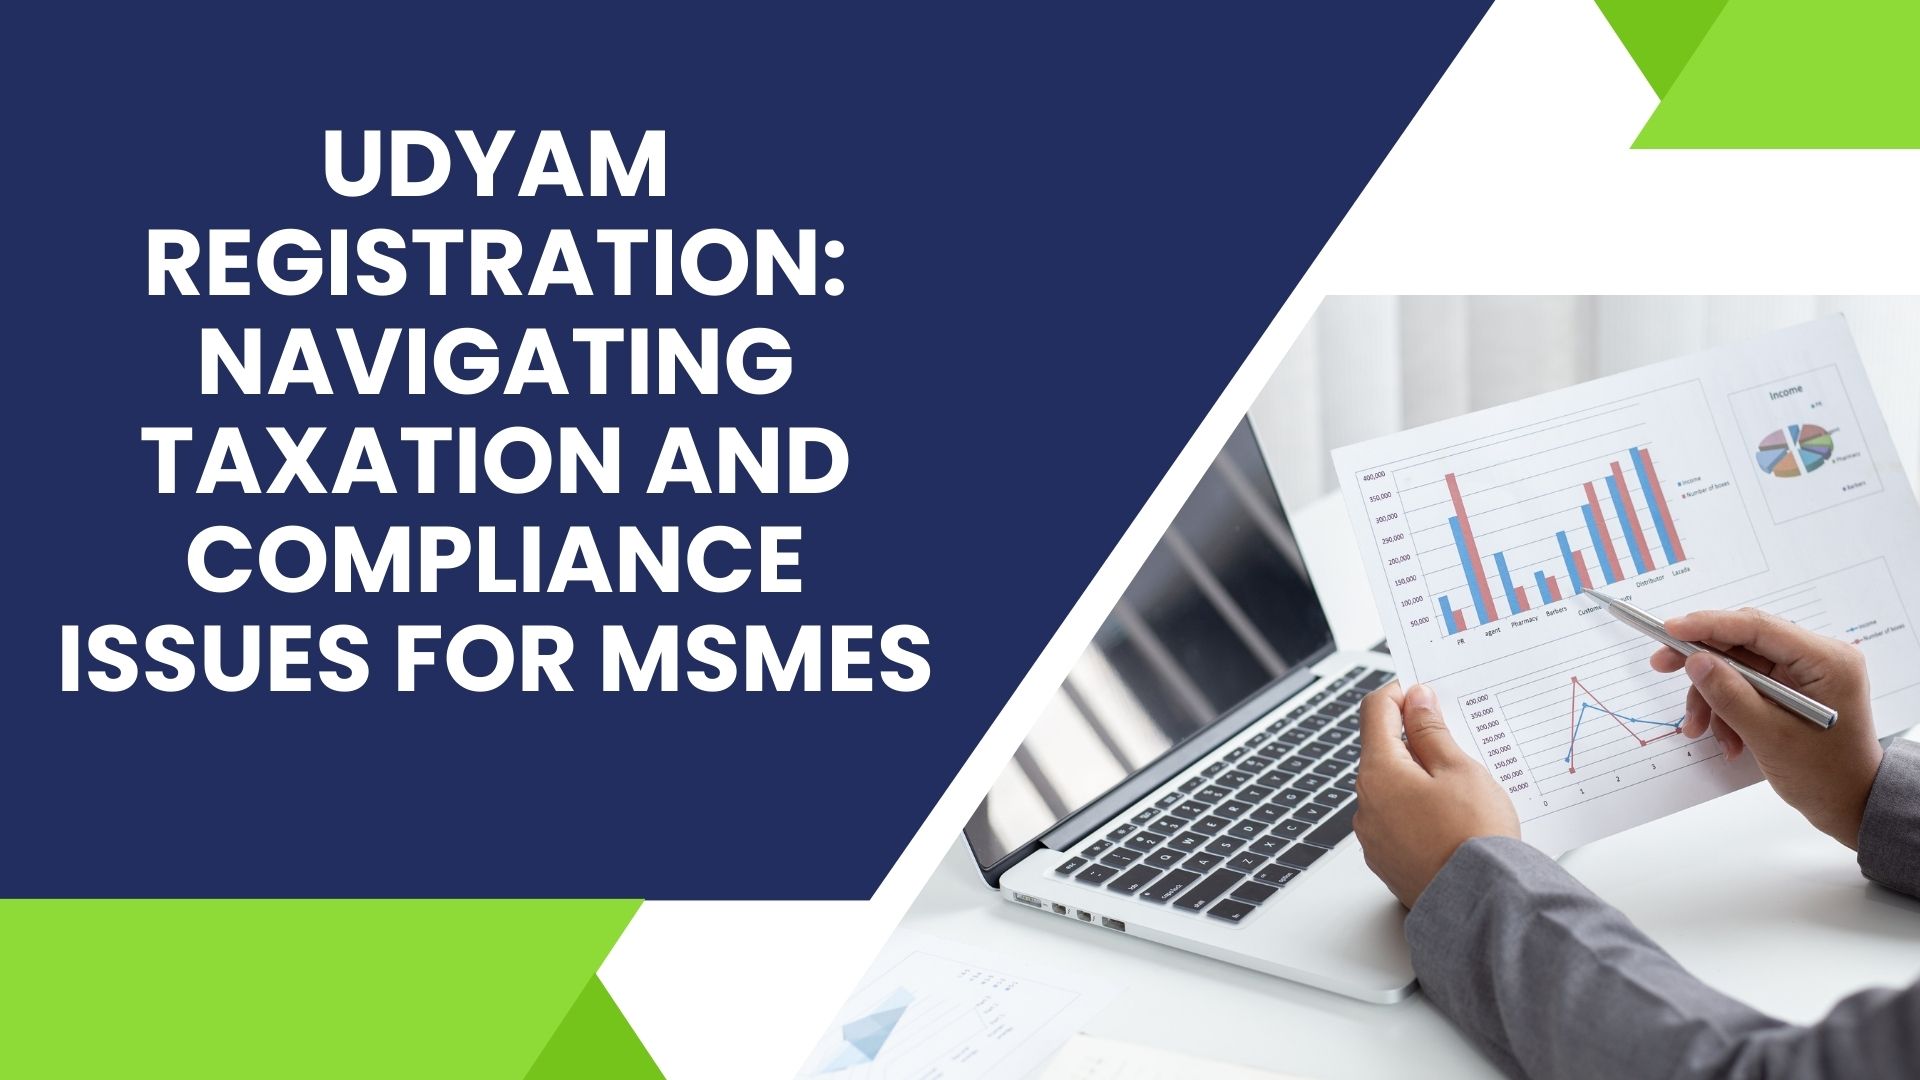 Udyam Registration Navigating Taxation and Compliance Issues for MSMEs